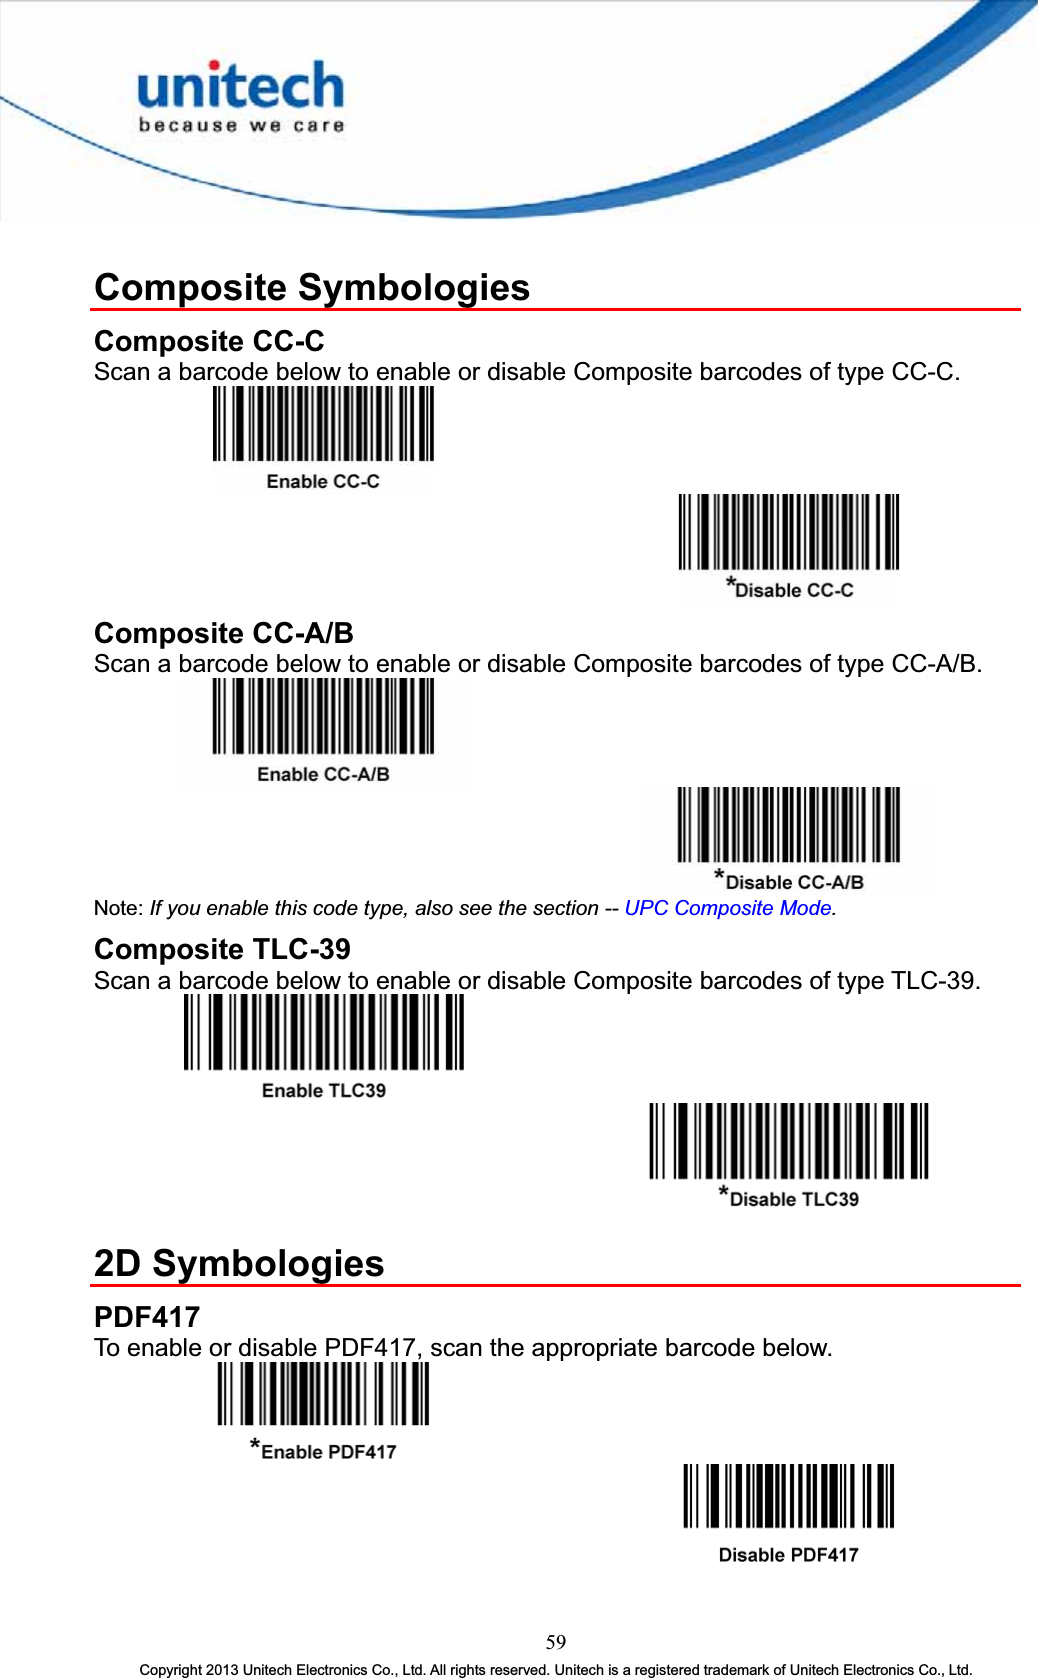 Composite Symbologies Composite CC-C Scan a barcode below to enable or disable Composite barcodes of type CC-C. Composite CC-A/B Scan a barcode below to enable or disable Composite barcodes of type CC-A/B. Note: If you enable this code type, also see the section -- UPC Composite Mode.Composite TLC-39 Scan a barcode below to enable or disable Composite barcodes of type TLC-39. 2D Symbologies PDF417To enable or disable PDF417, scan the appropriate barcode below. 59Copyright 2013 Unitech Electronics Co., Ltd. All rights reserved. Unitech is a registered trademark of Unitech Electronics Co., Ltd. 